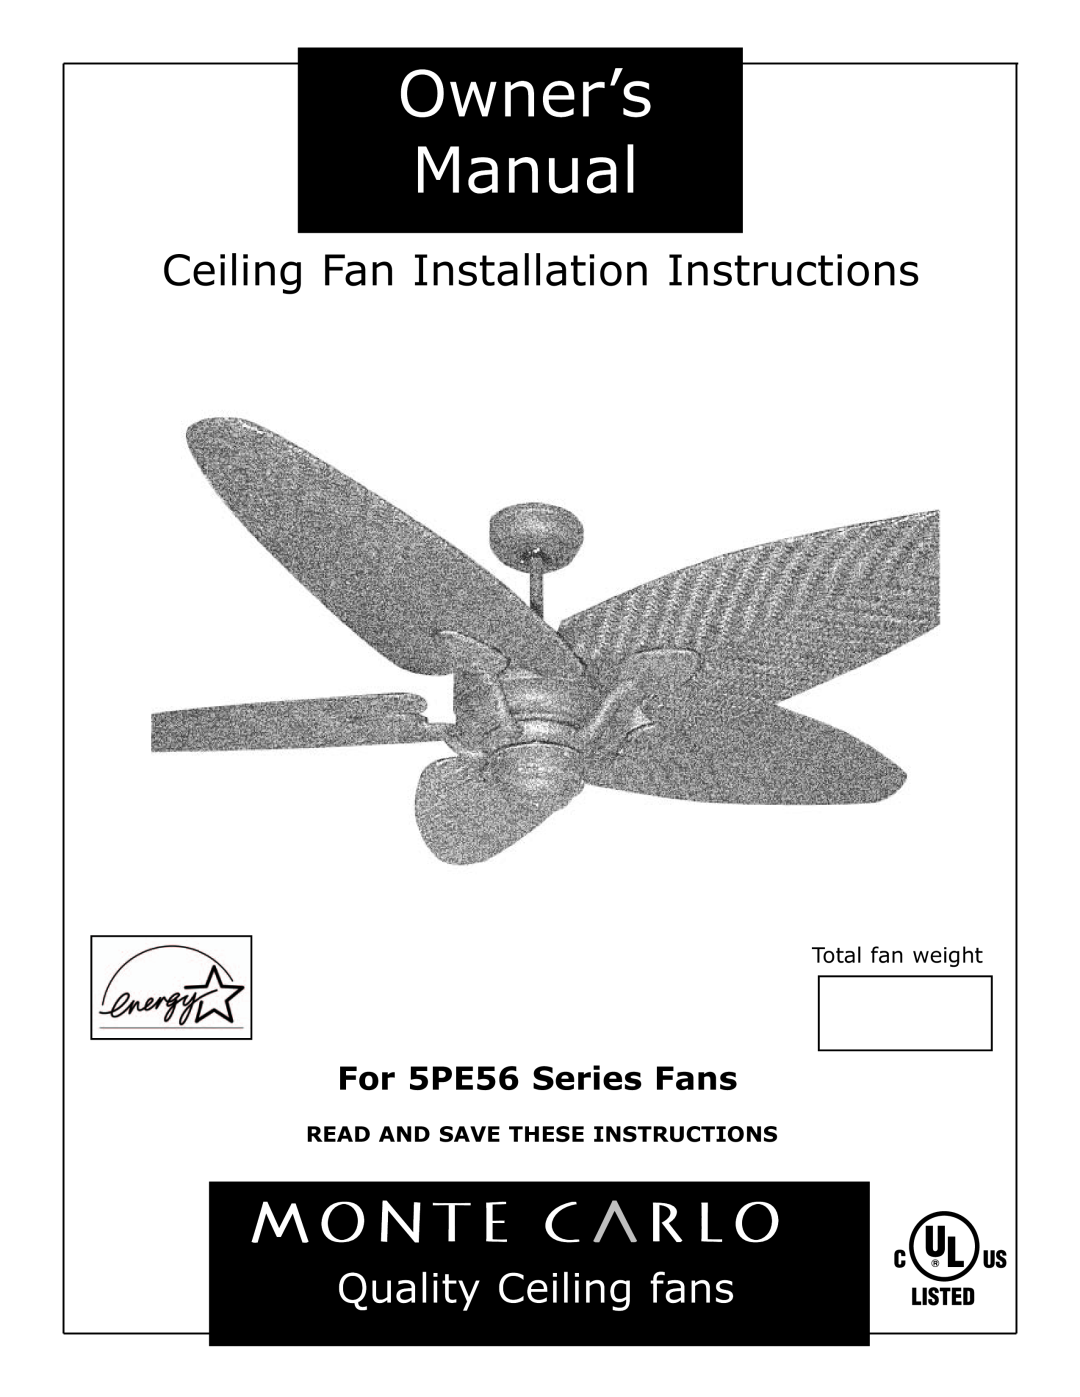 Monte Carlo Fan Company 5PE56 owner manual Read And Save These Instructions, Ceiling Fan Installation Instructions 